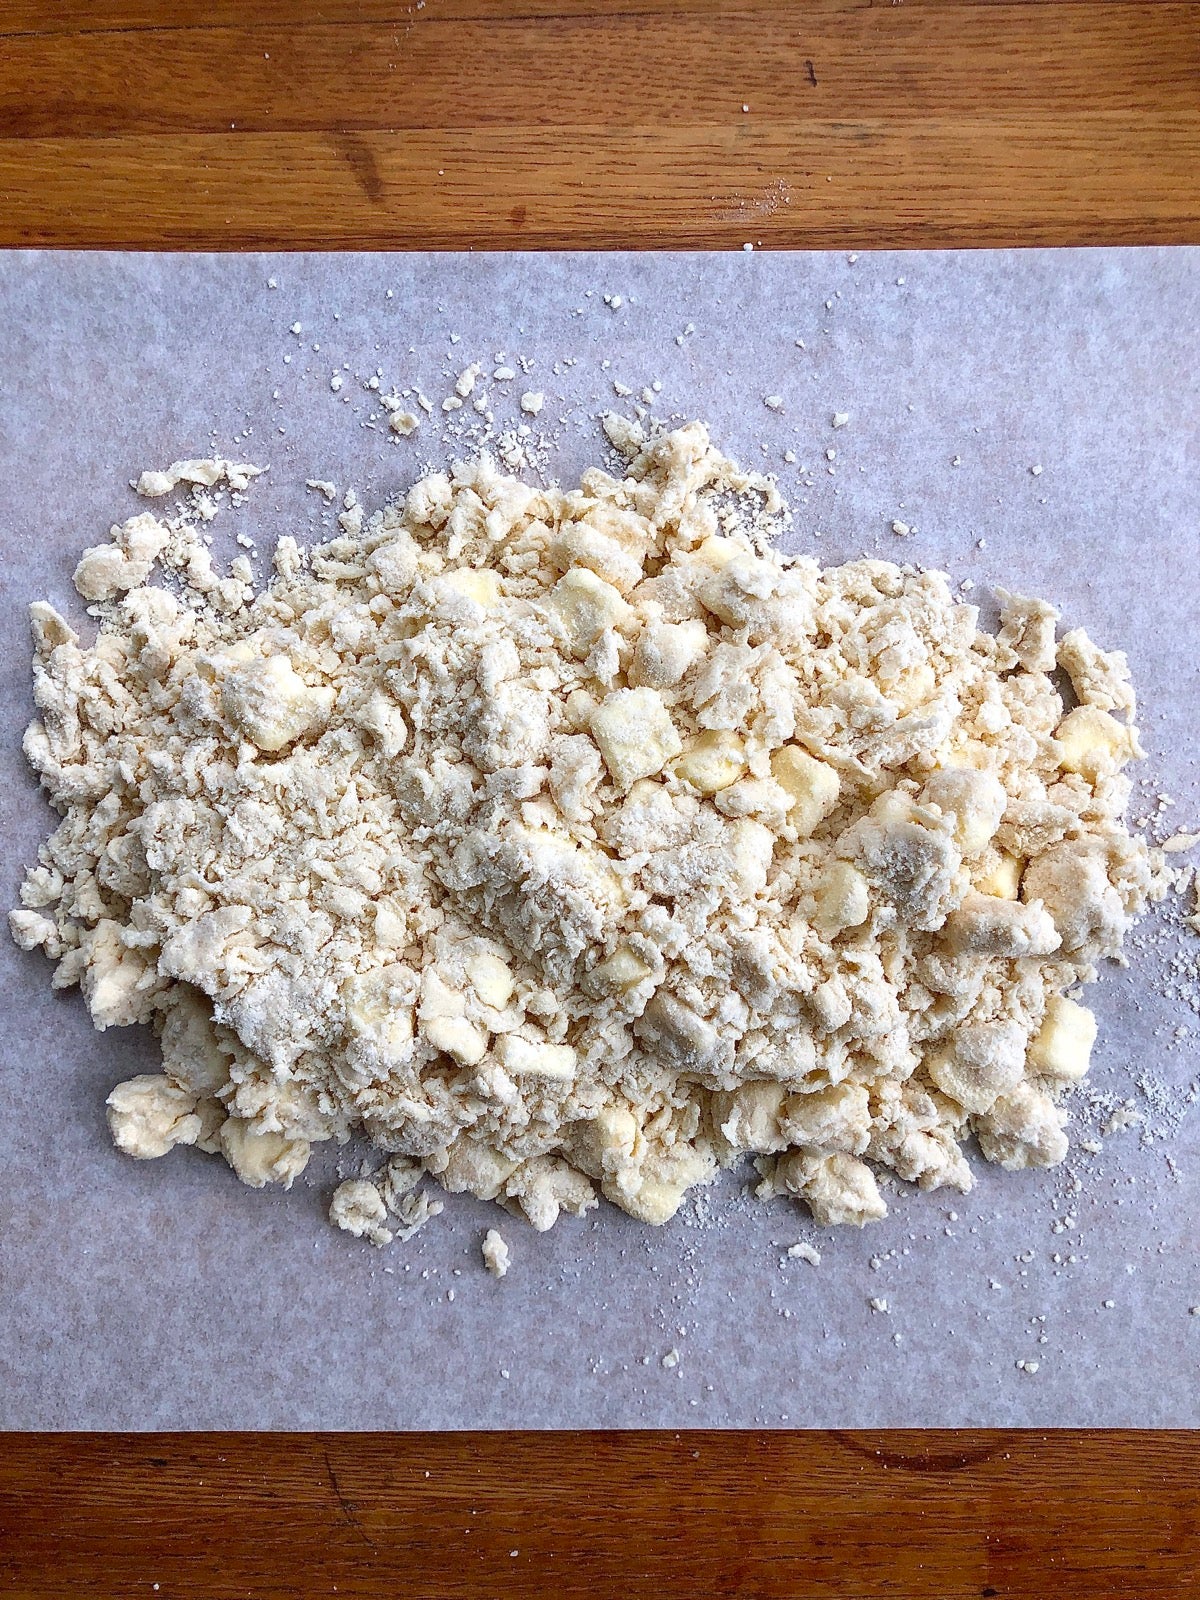 Dry clumps of pie crust dough on a sheet of parchment.